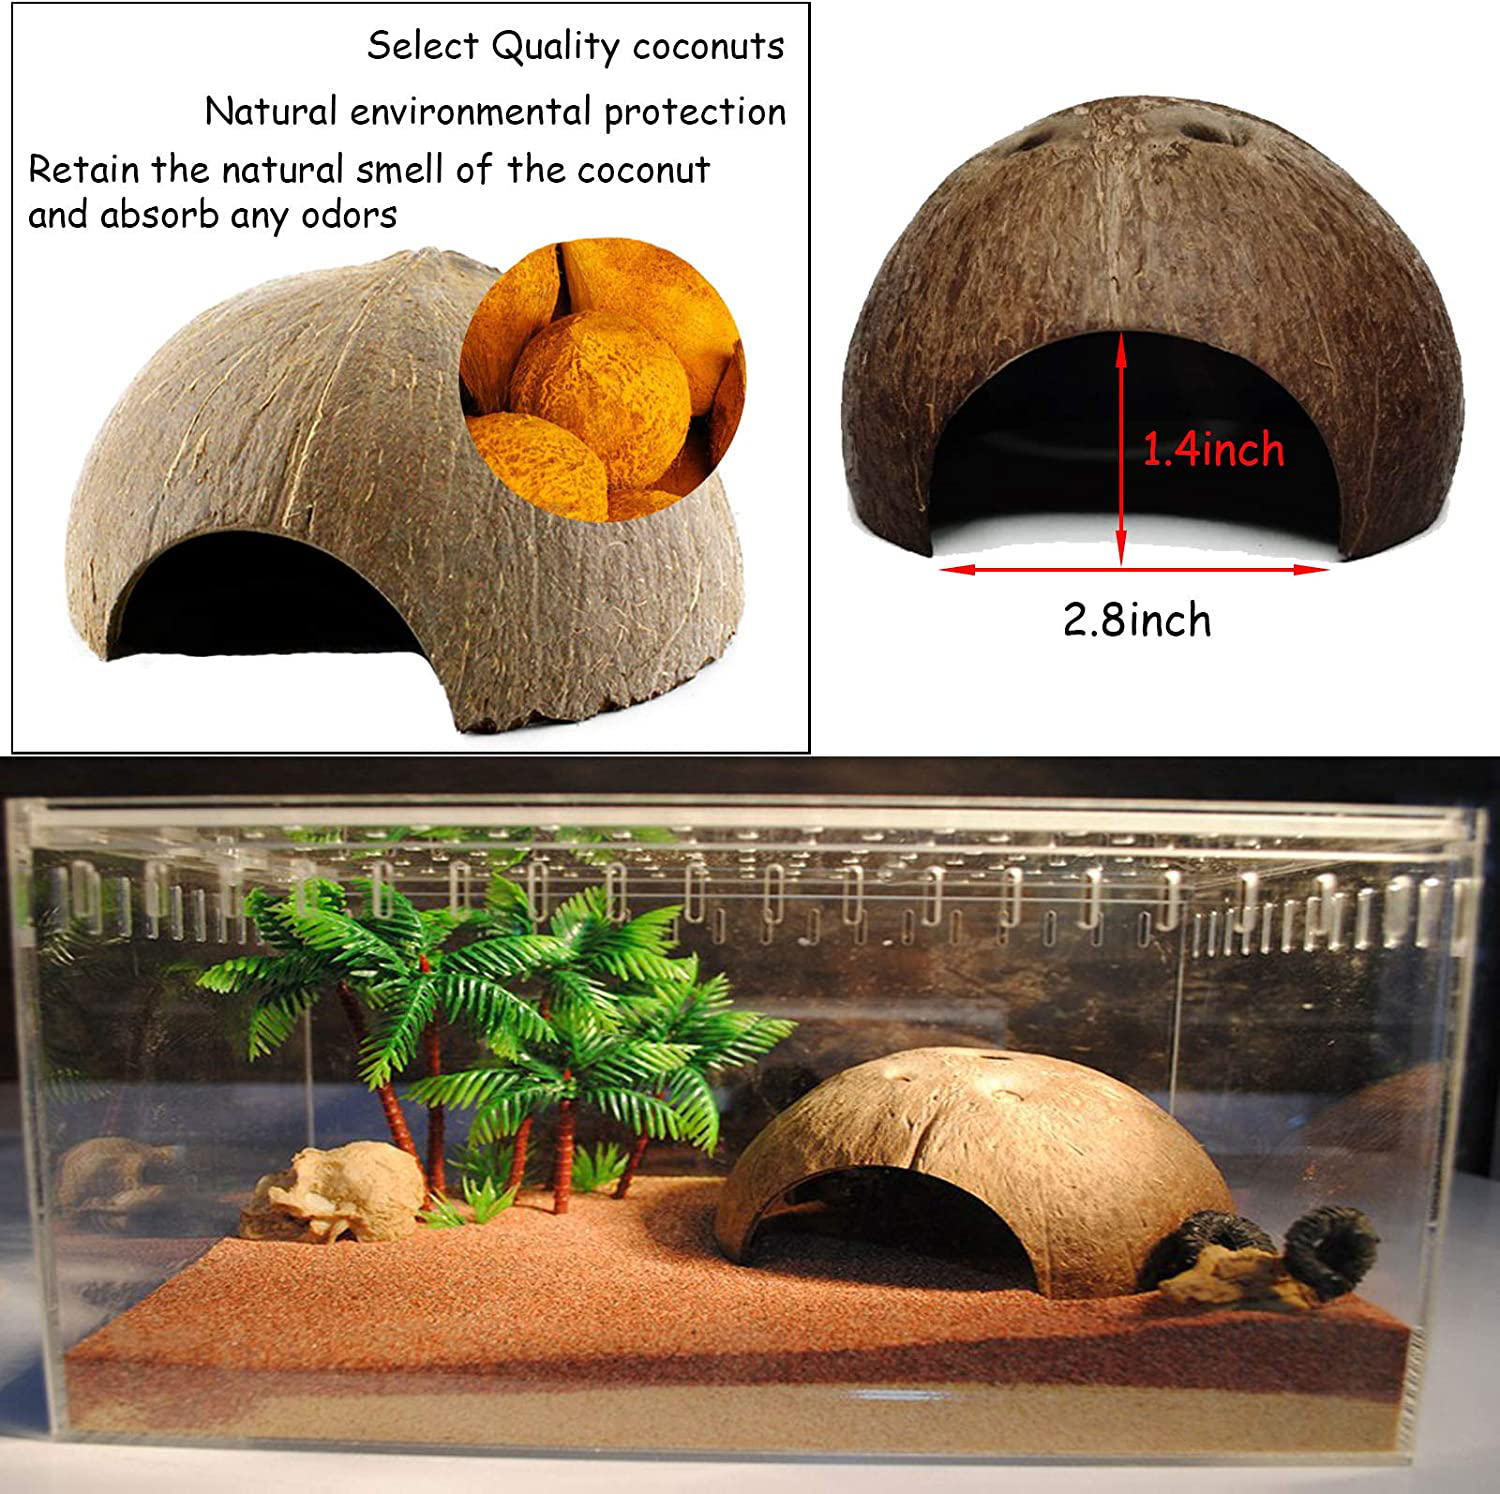 Kathson Leopard Gecko Tank Accessories Reptile Habitat Decor Reptiles Hanging Plants Artificial Bendable Climbing Vines and Hidden Coconut Shell Hole for Chameleon, Lizards, Gecko, Snakes